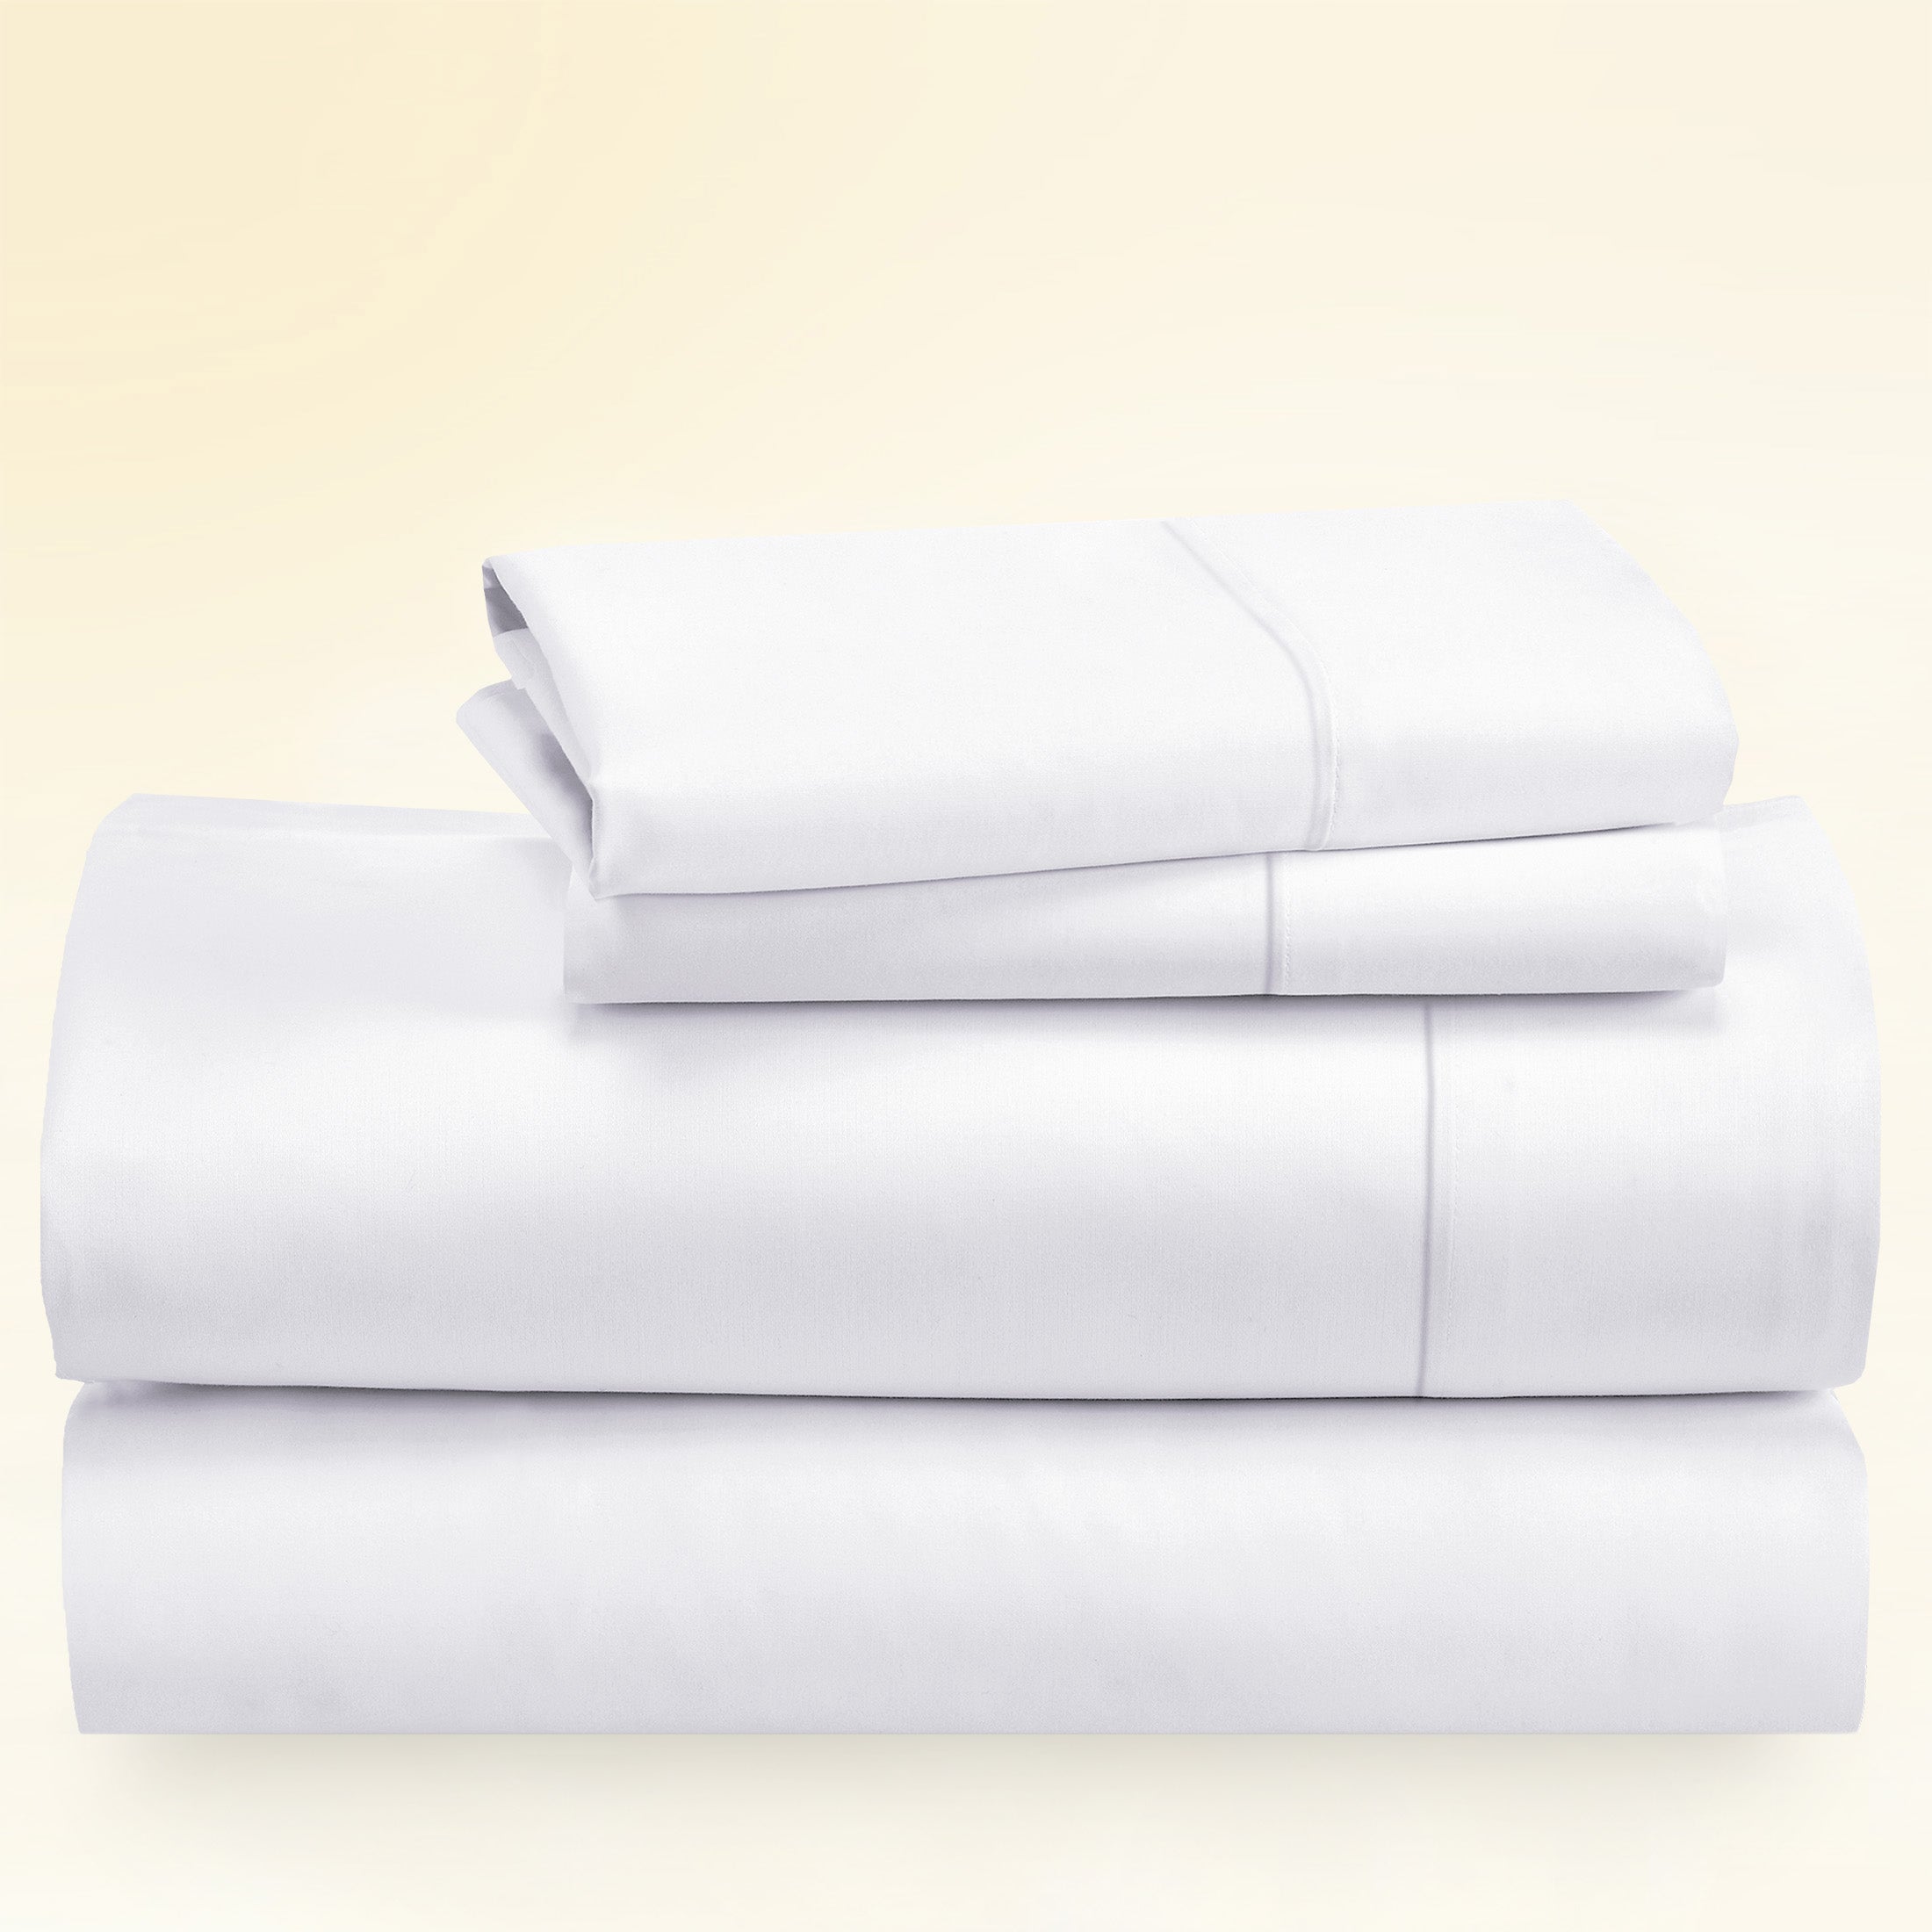 Real Soft 300 Thread Cotton Queen Bed Sheets Set, Hotel Quality Thick and  Cool 4 PCS Includes Deep Pocket Bottom Sheet 